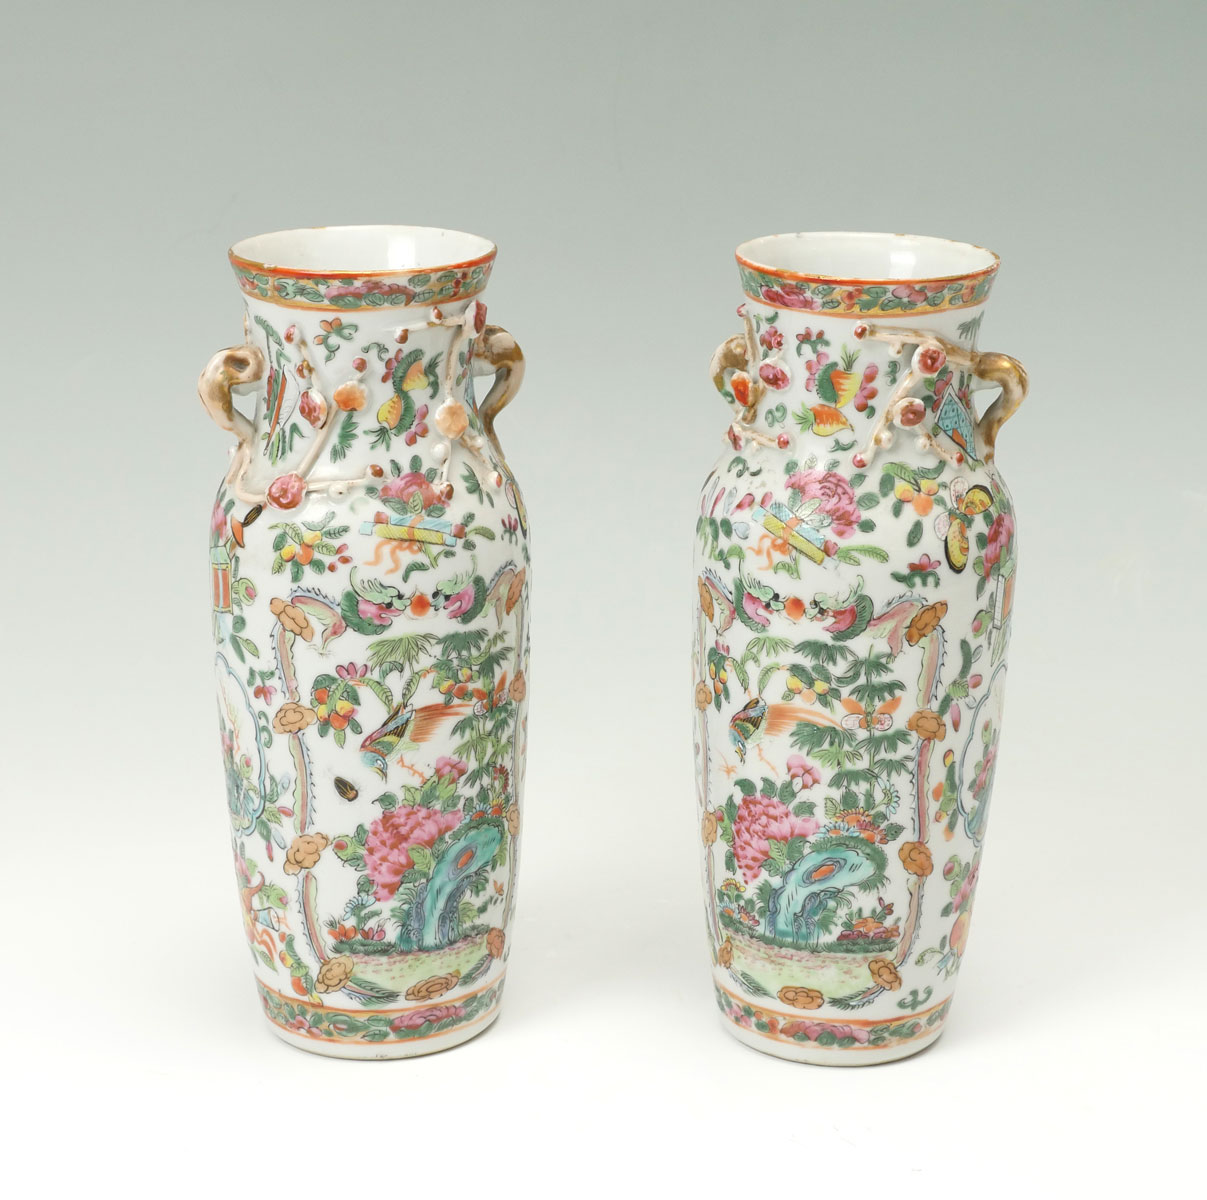 PAIR OF CHINESE FAMILLE ROSE VASES: